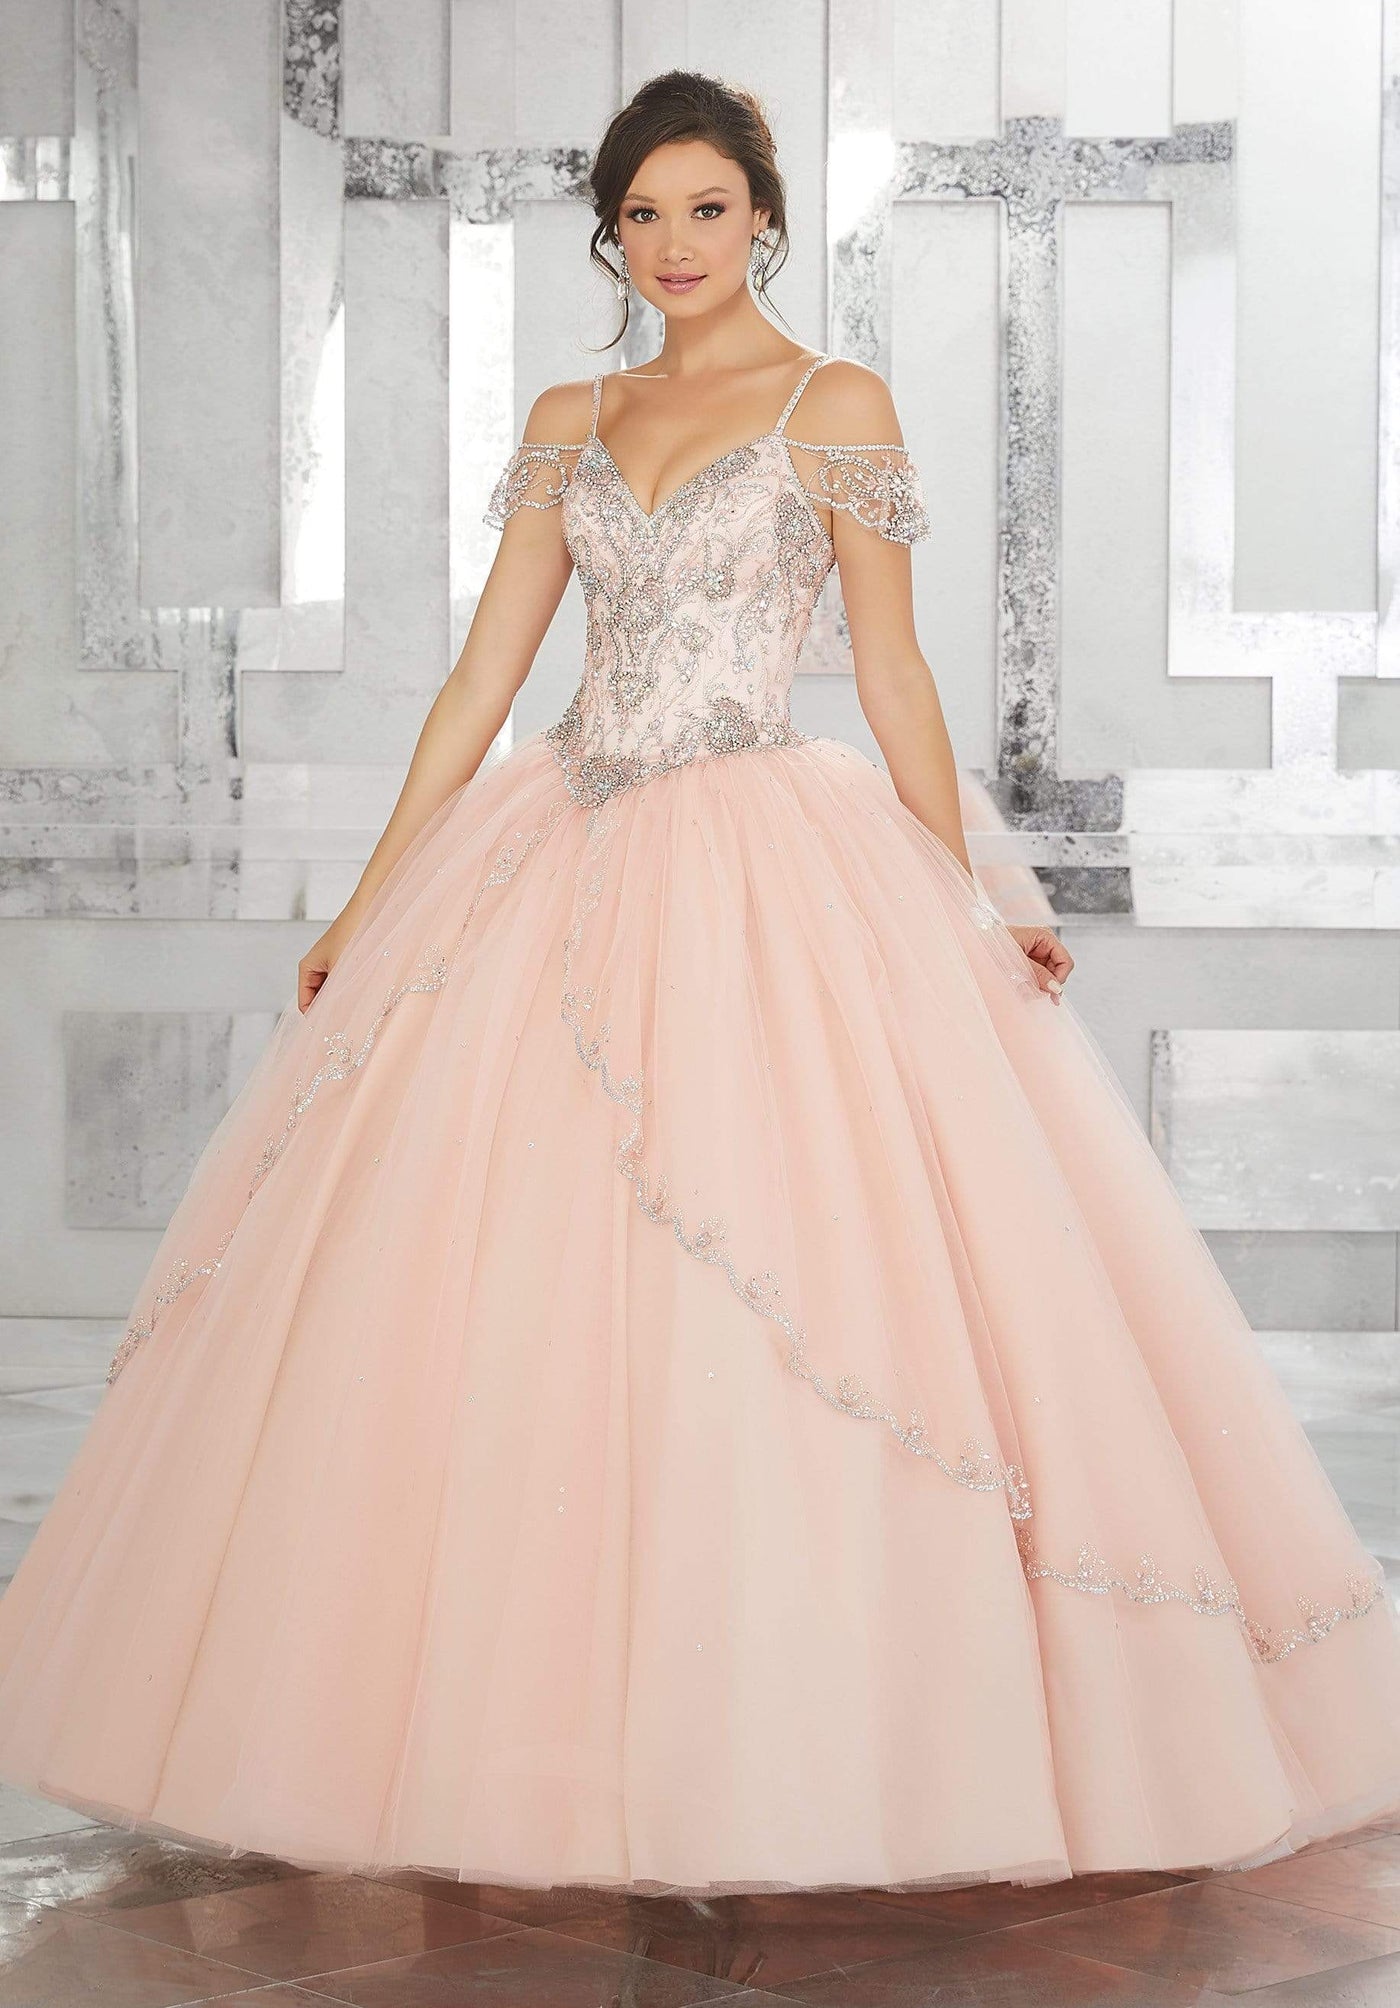 Vizcaya by Mori Lee - 89135 Jeweled Draped Off Shoulder Ballgown Quinceanera Dresses 00 / Blush